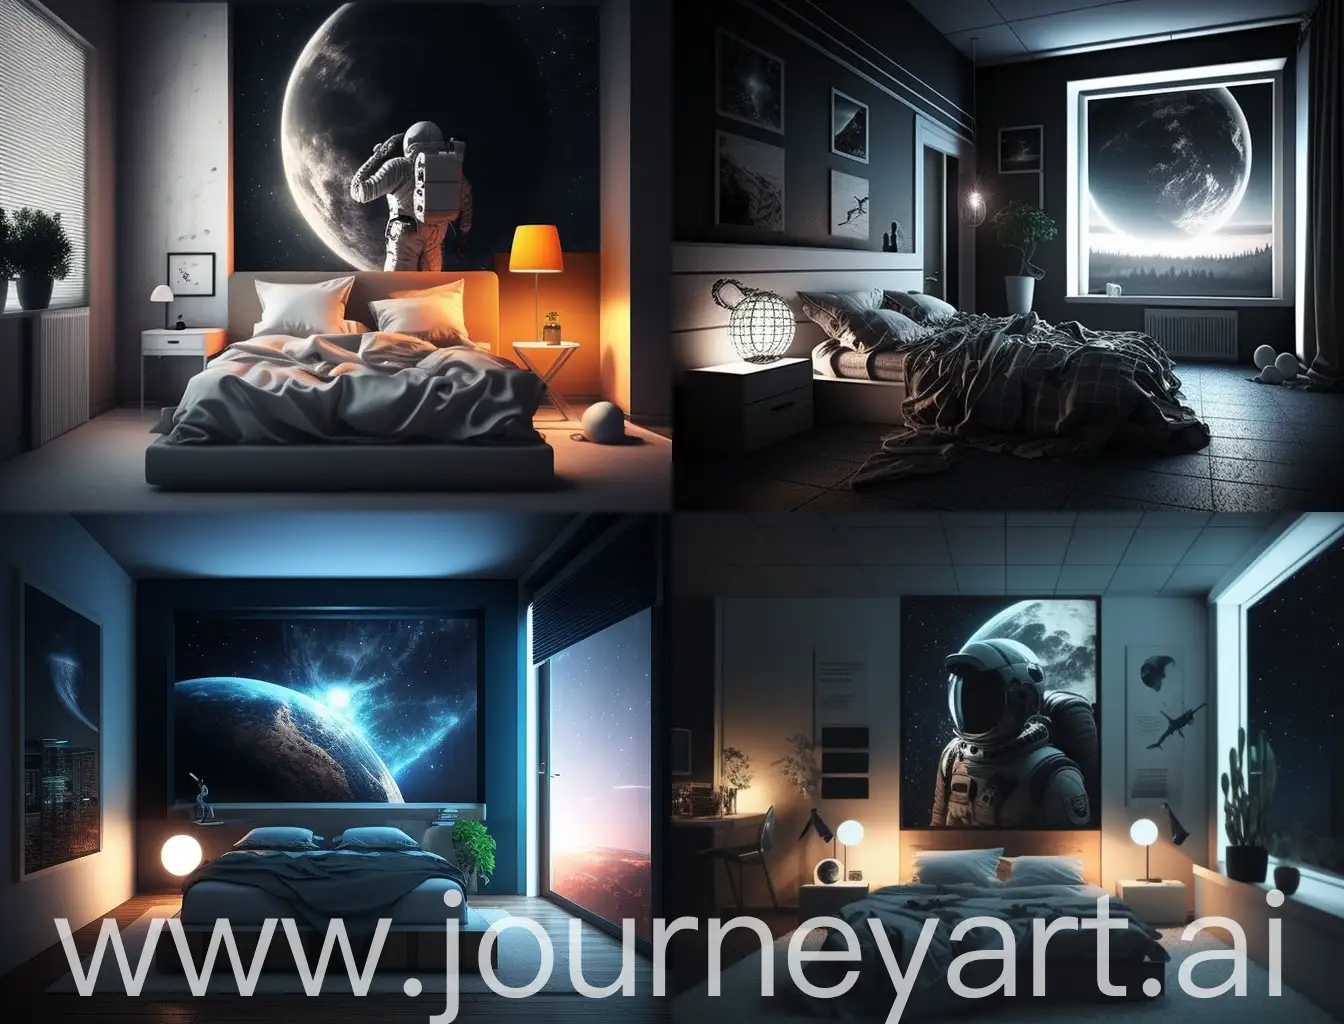 Modern-SpaceThemed-Bedroom-with-Nighttime-Ambiance